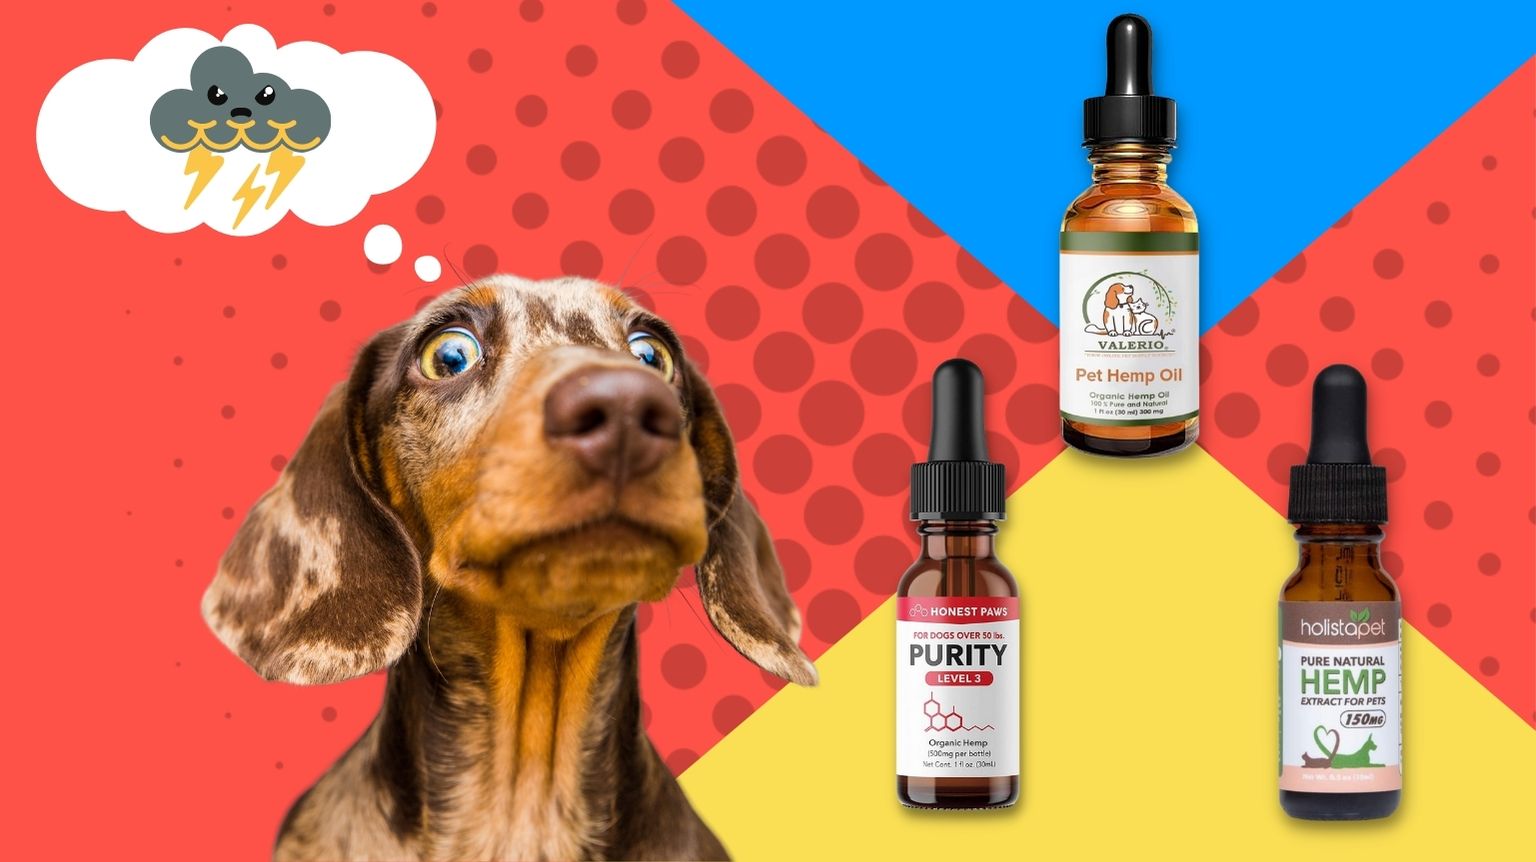 “Guide to CBD Oil for Dogs: Benefits, Risks, and More”